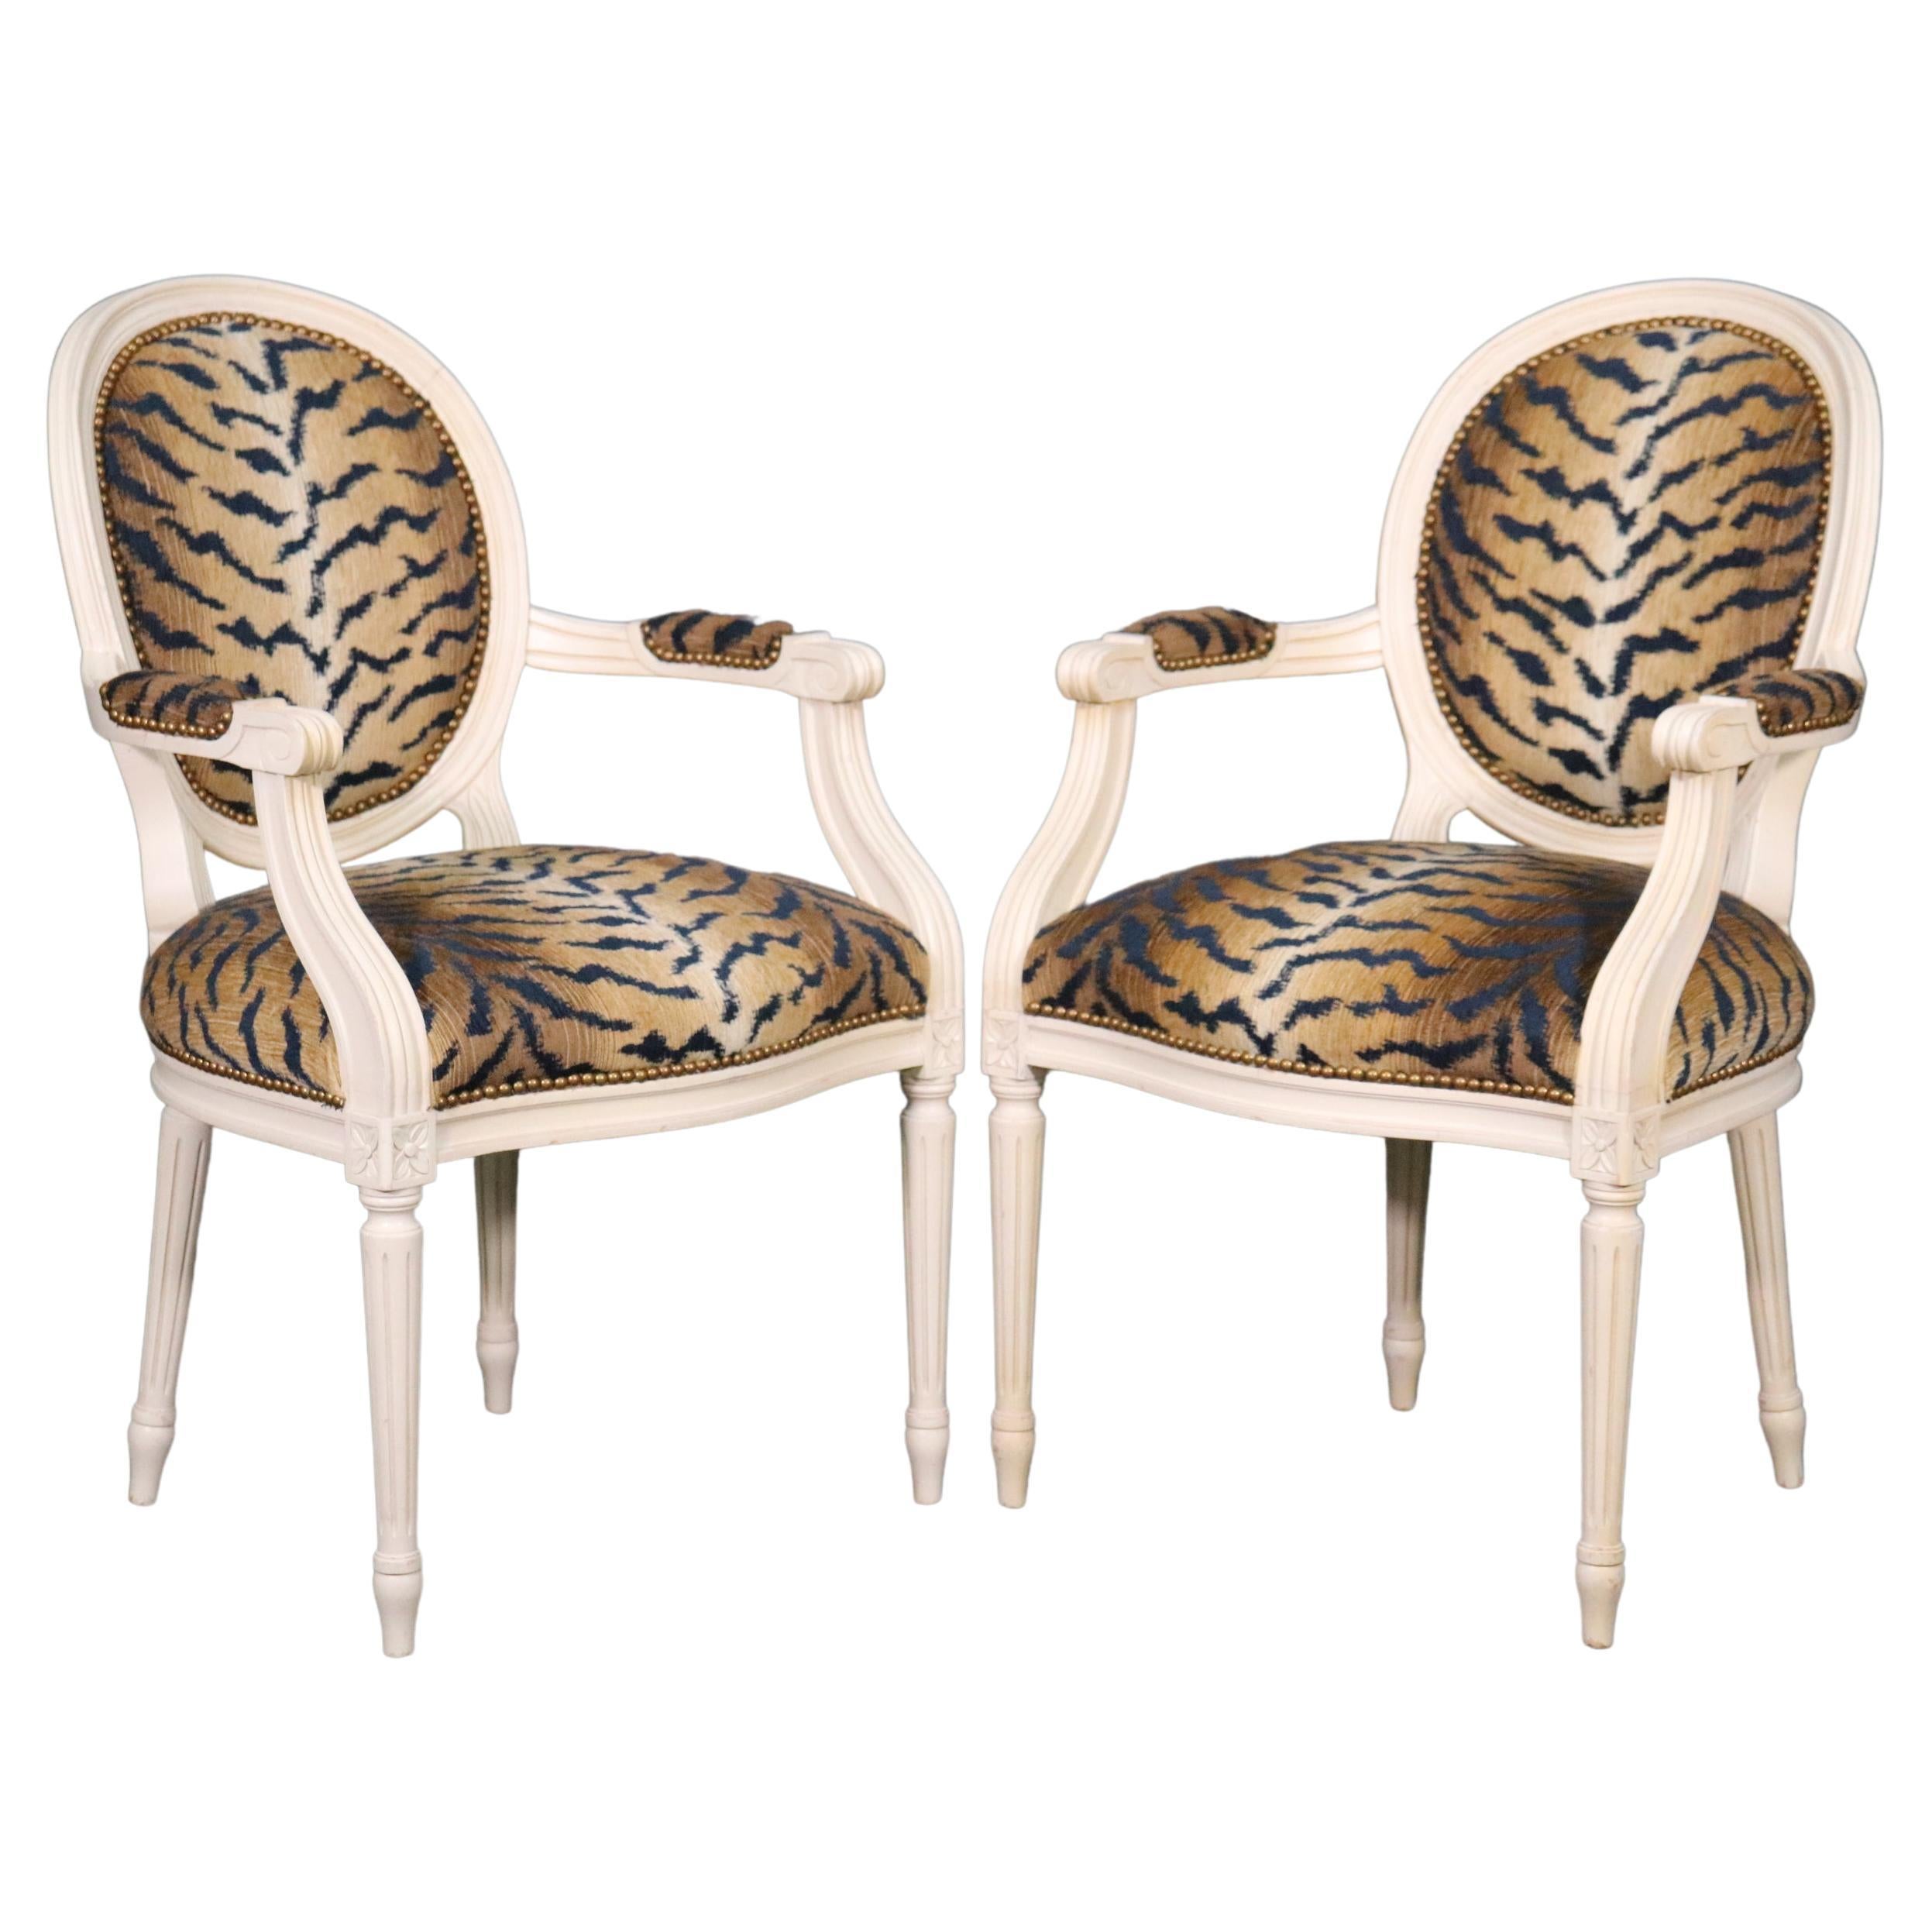 Pair White Painted Oval Back French Louis XVI Armchairs in Tiger Print Fabric For Sale